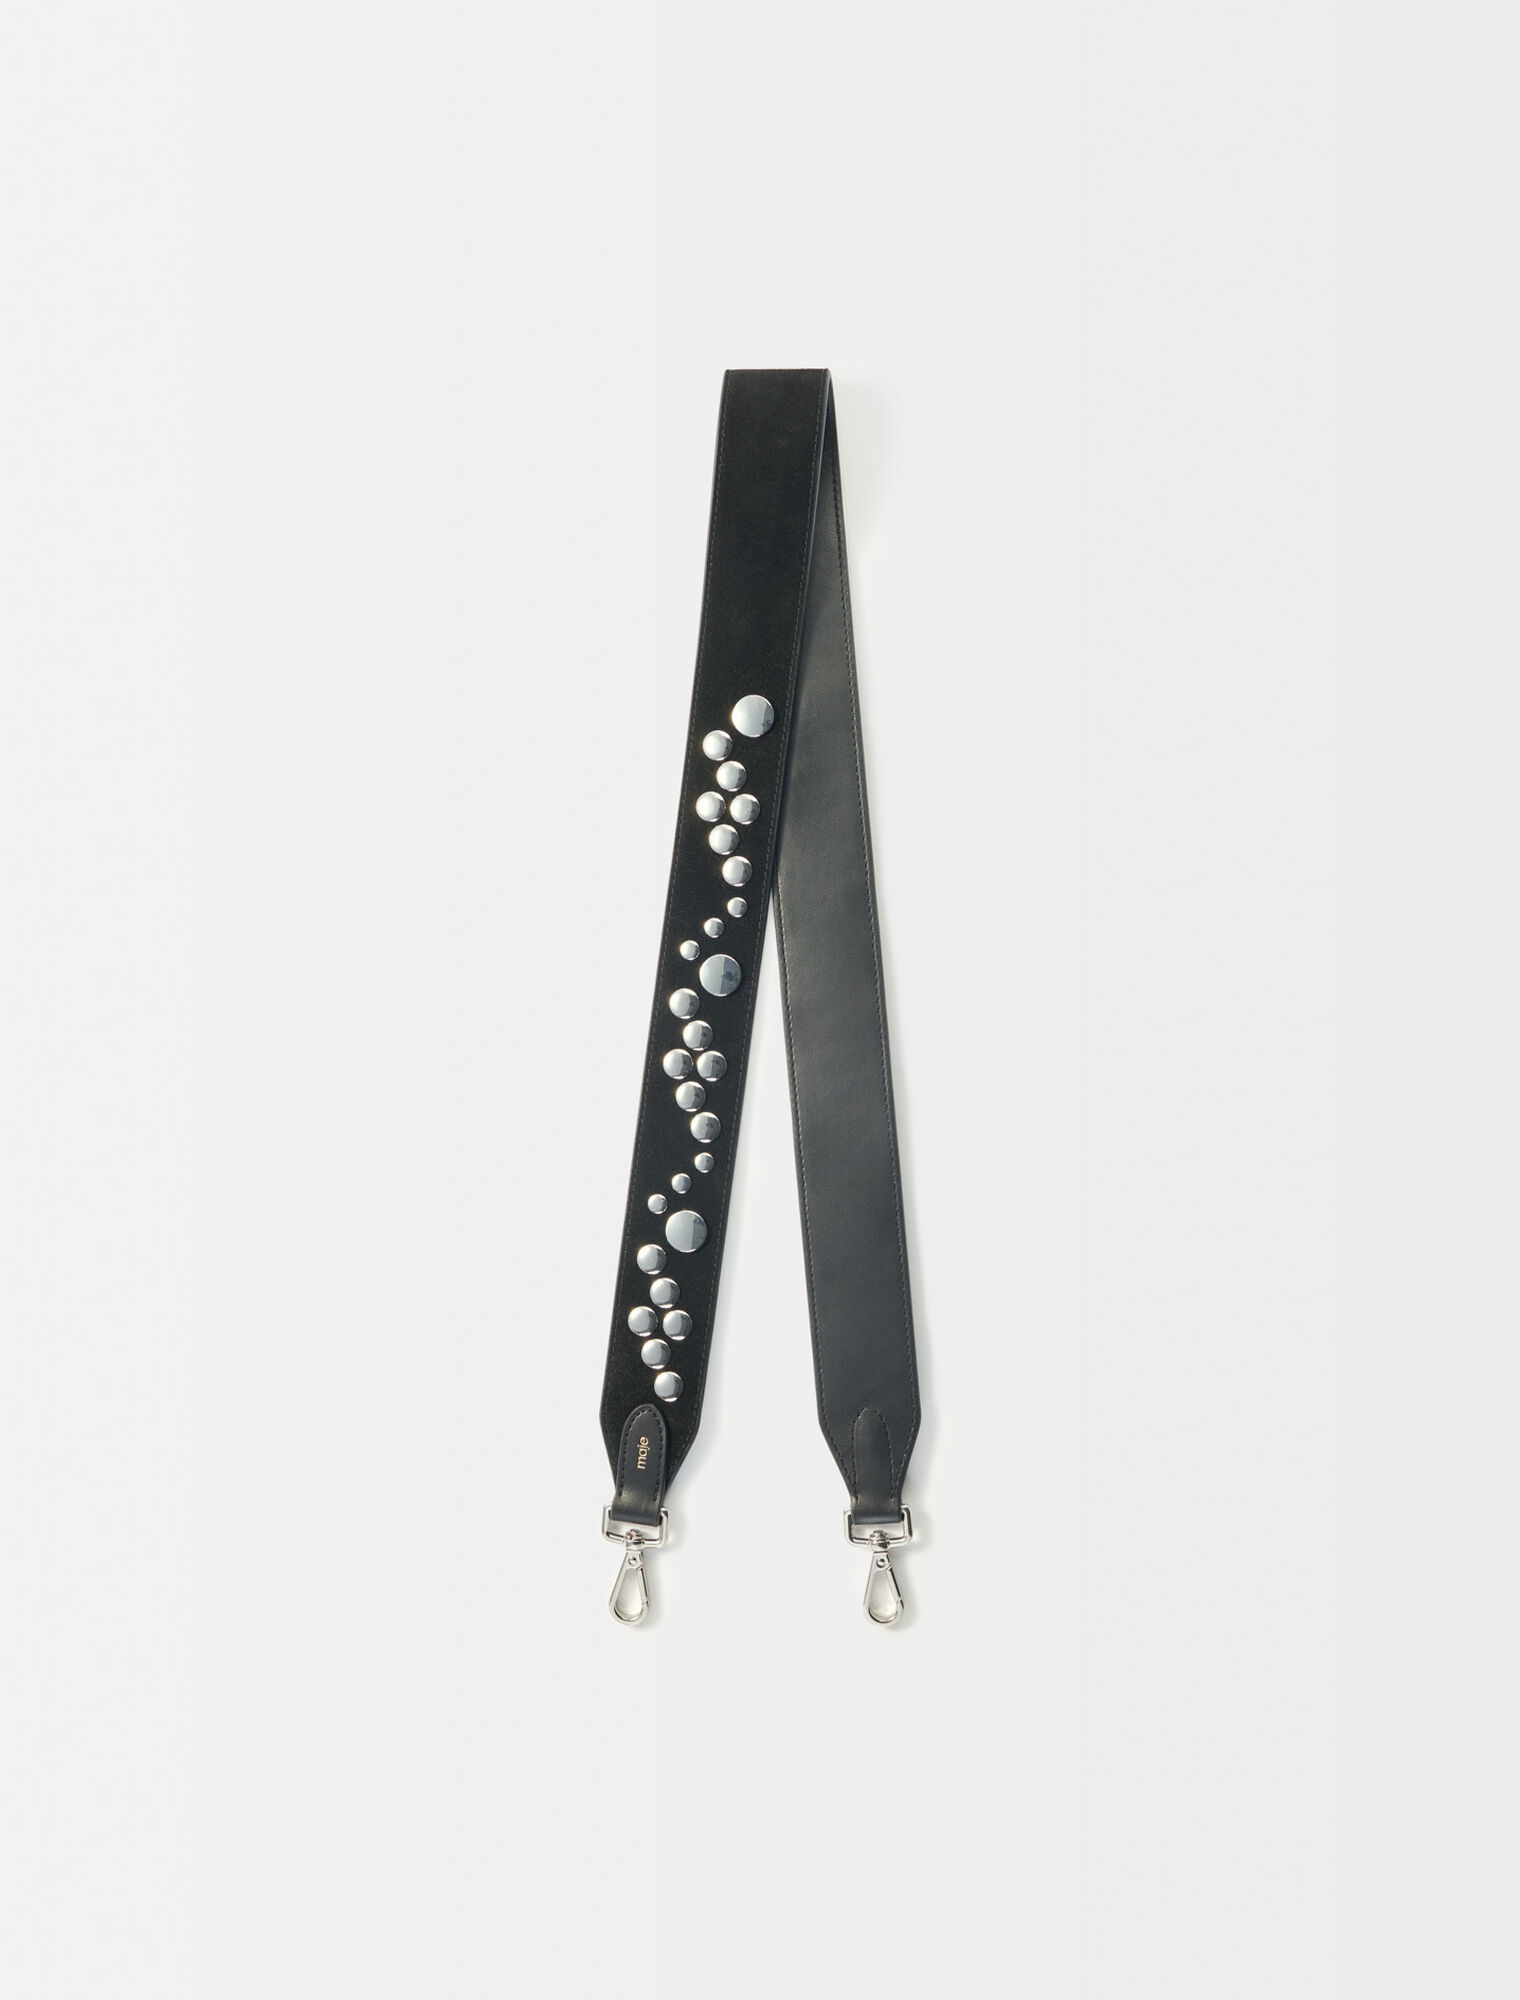 Black suede strap with silver-tone studs